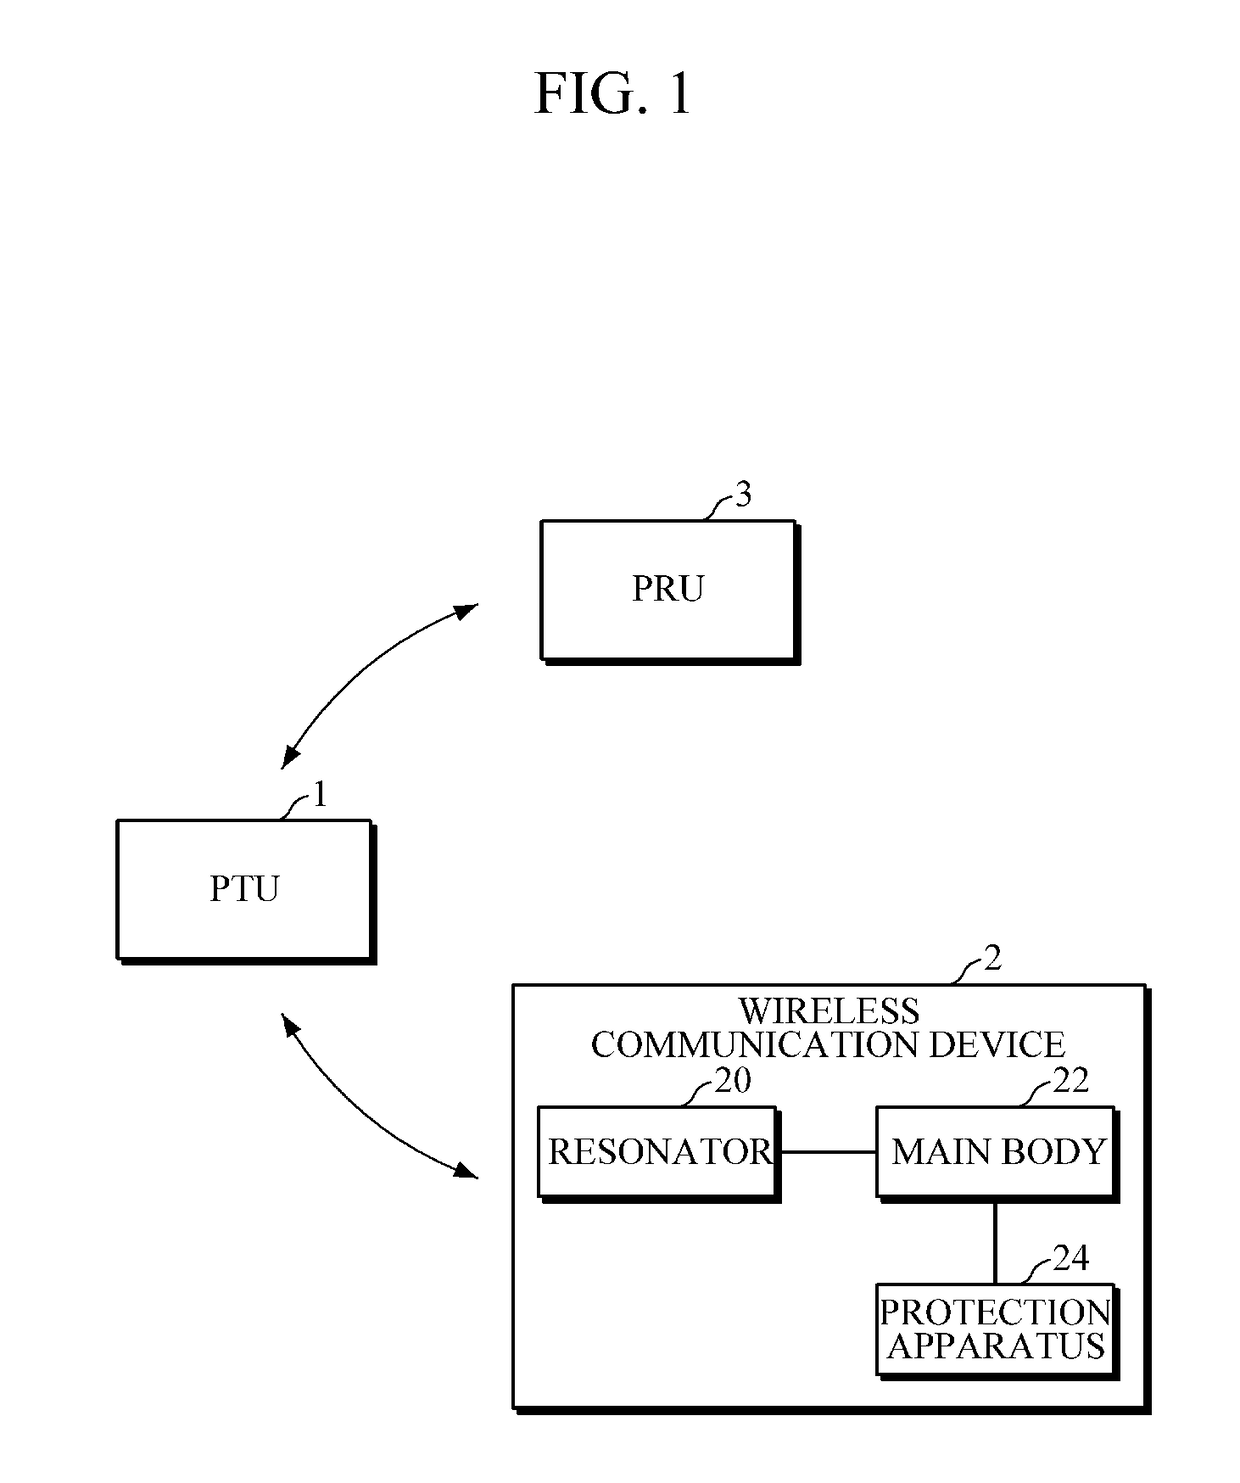 Apparatus for protecting wireless communication device and wireless communication device comprising same